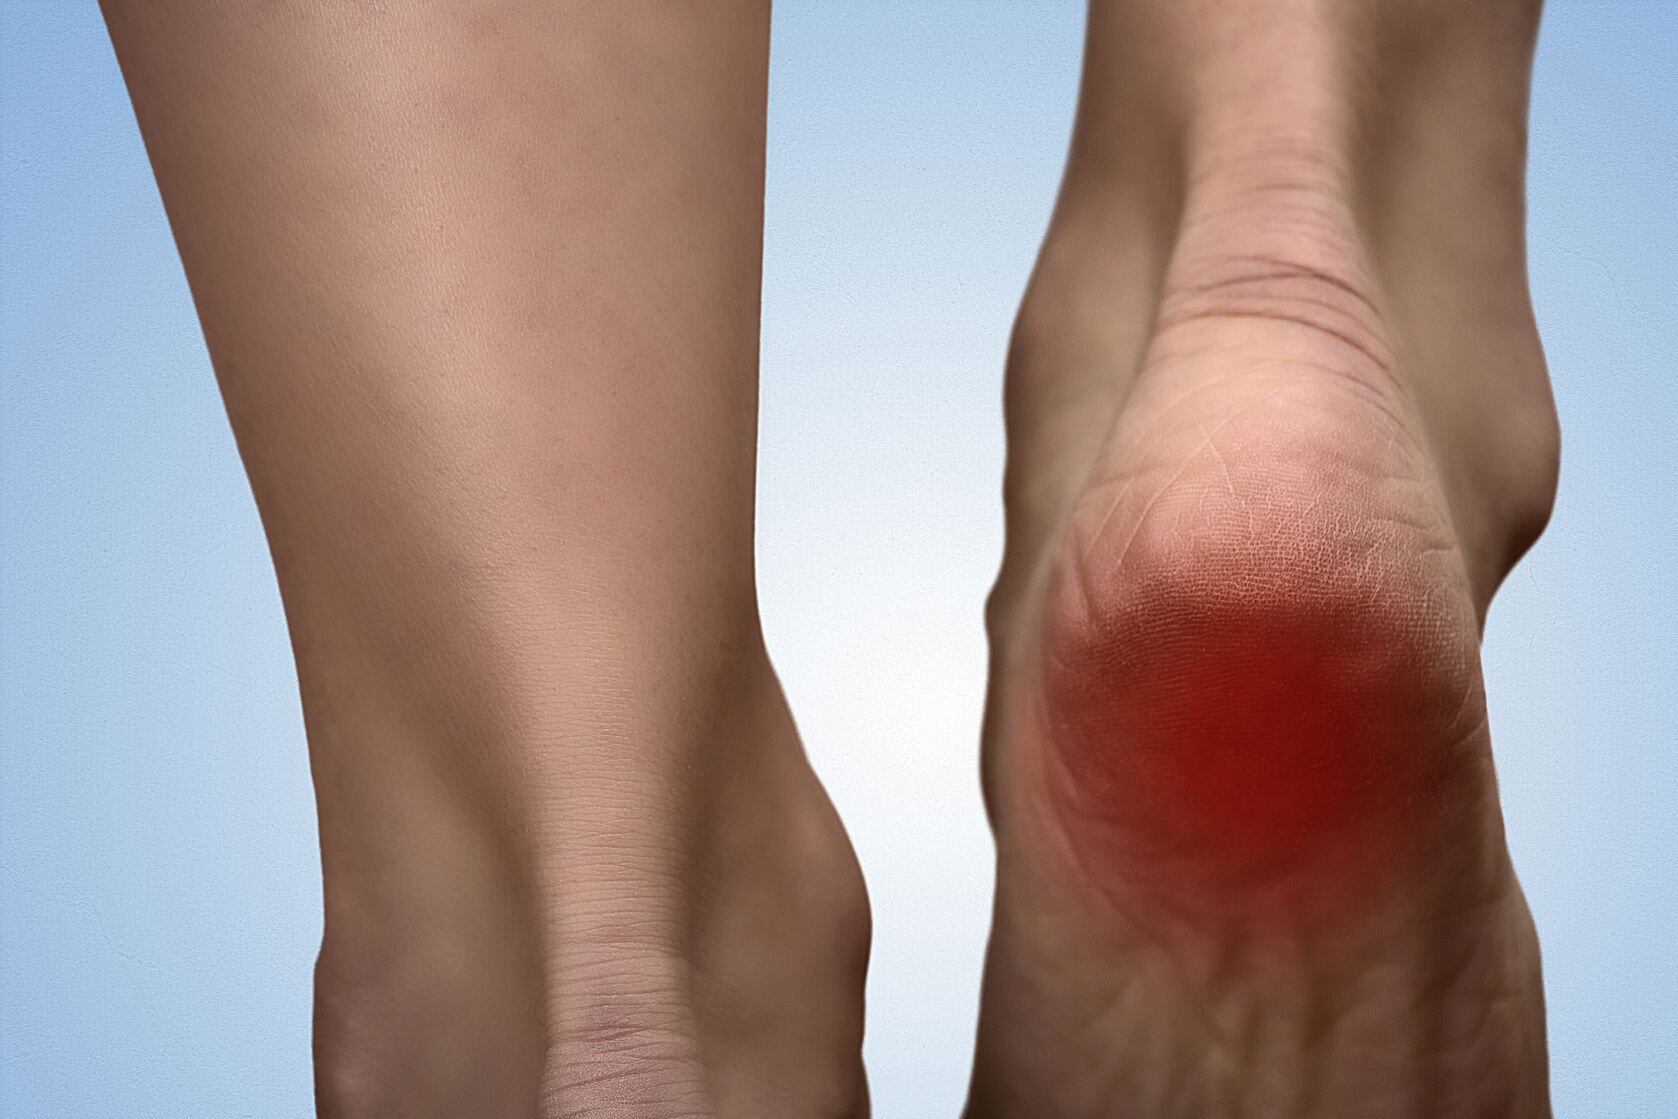 Heel Spurs Treatment in Miami | Barry M. Tuvel, DPM